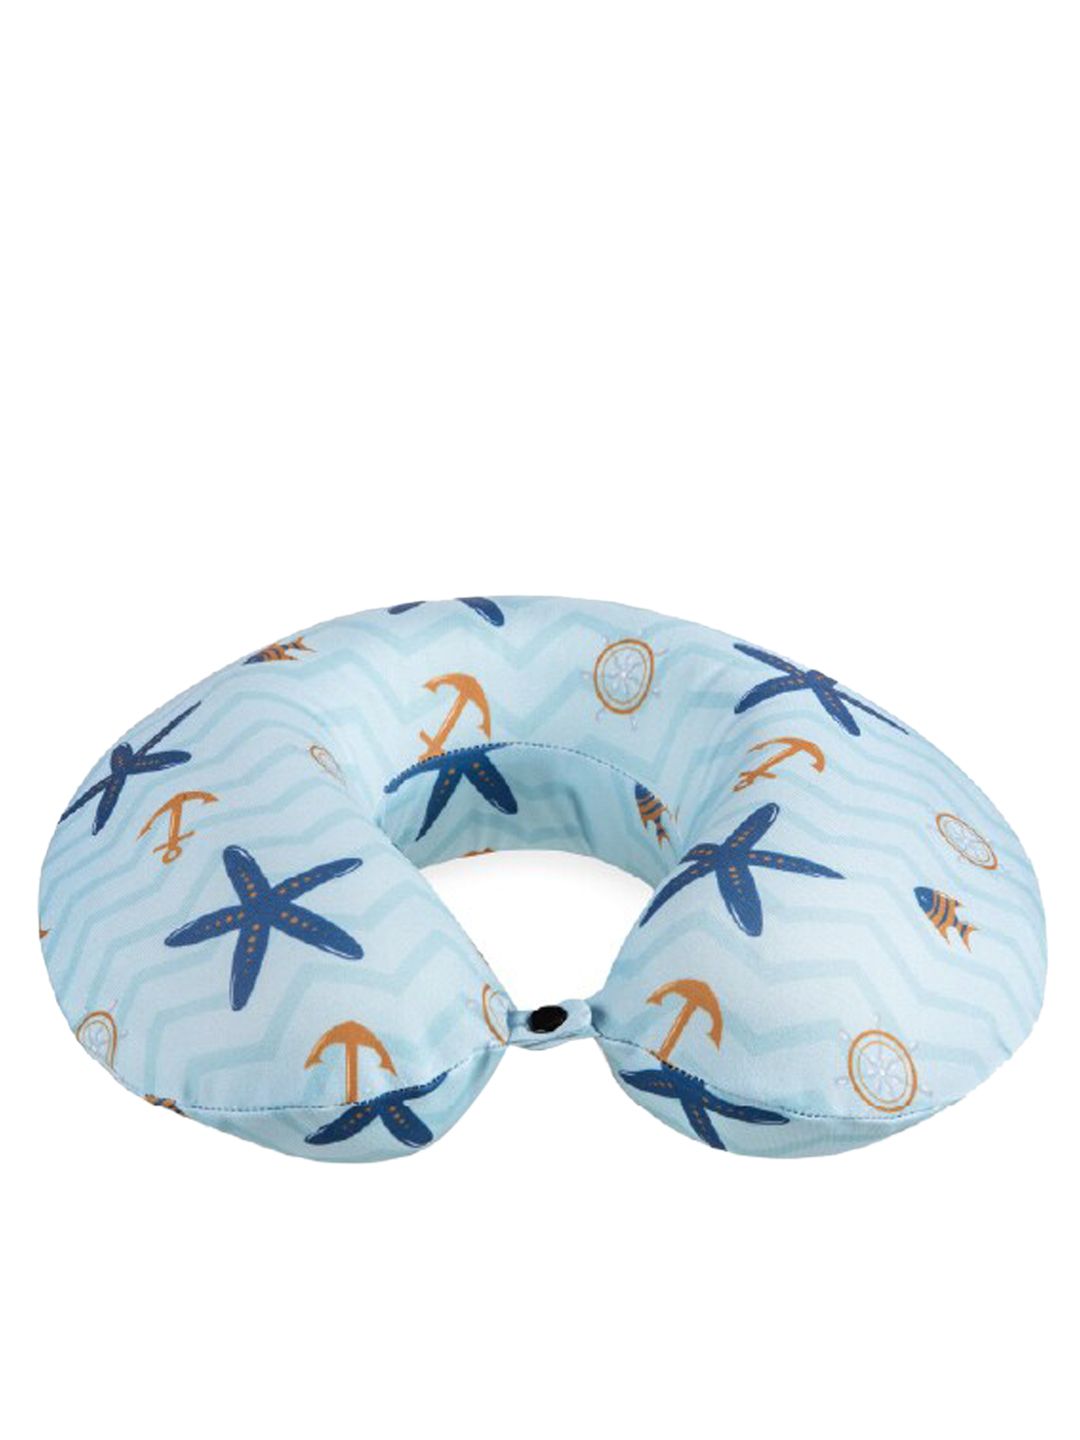 The White Willow Blue Printed Memory Foam U Shaped Neck Pillow Price in India